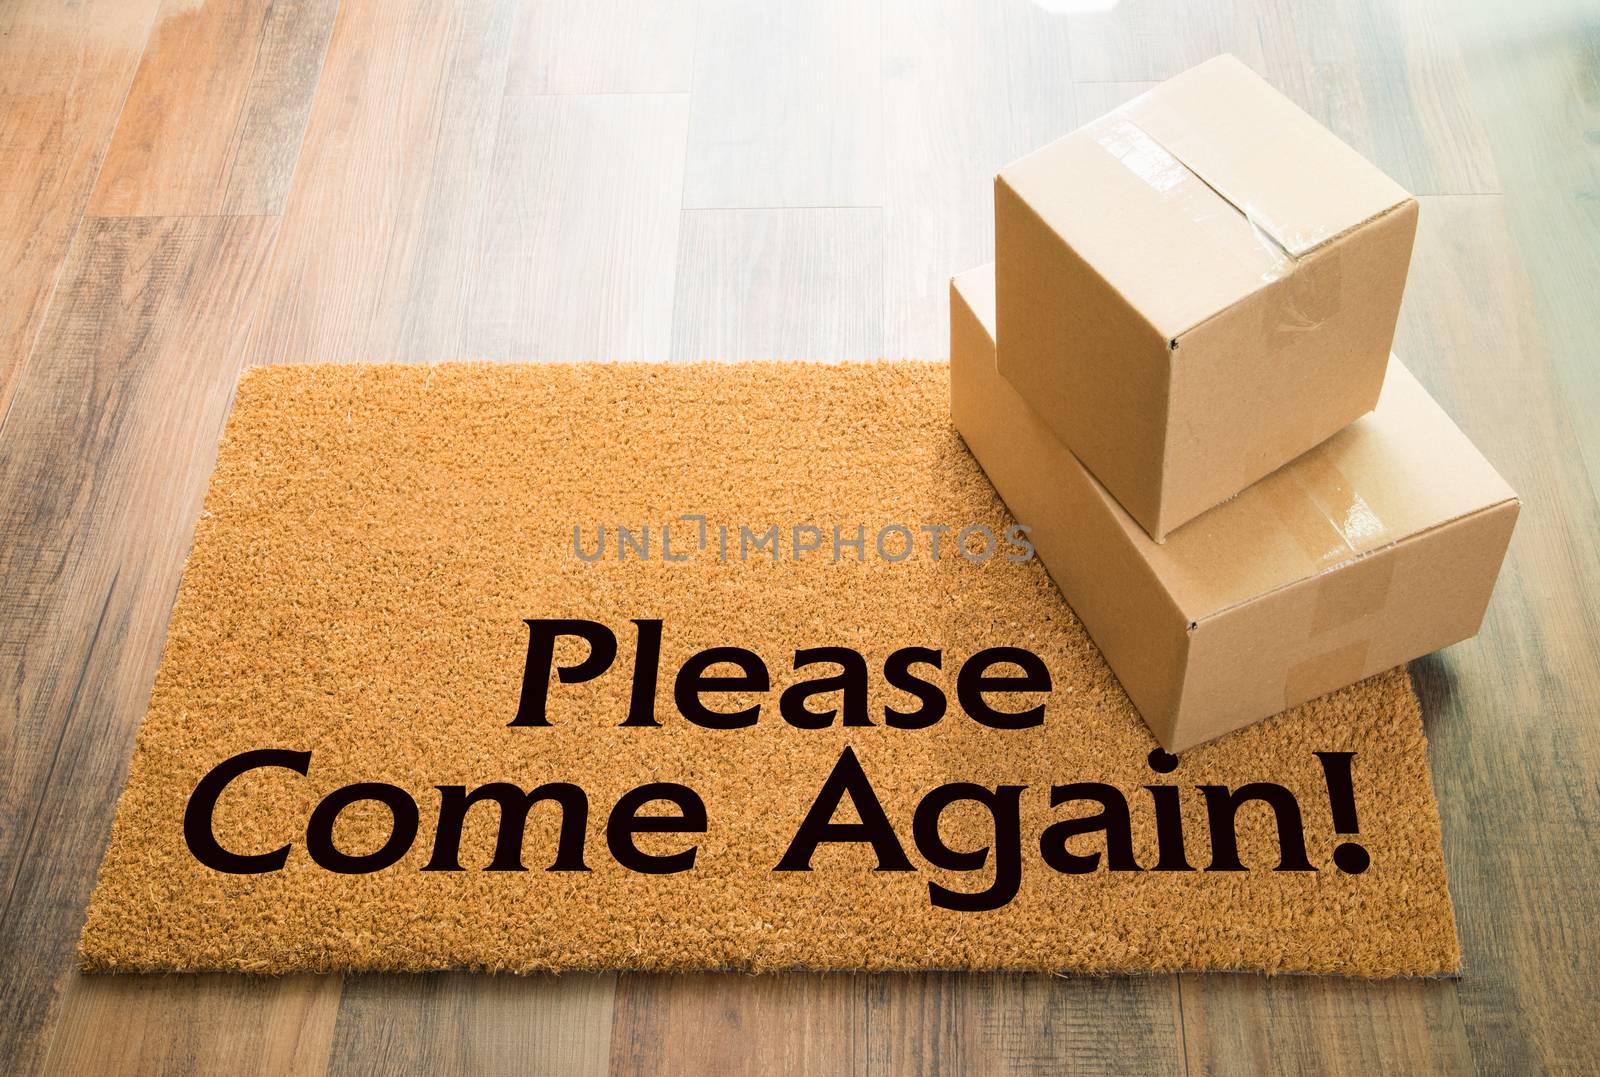 Please Come Again Welcome Mat On Wood Floor With Shipment of Boxes.